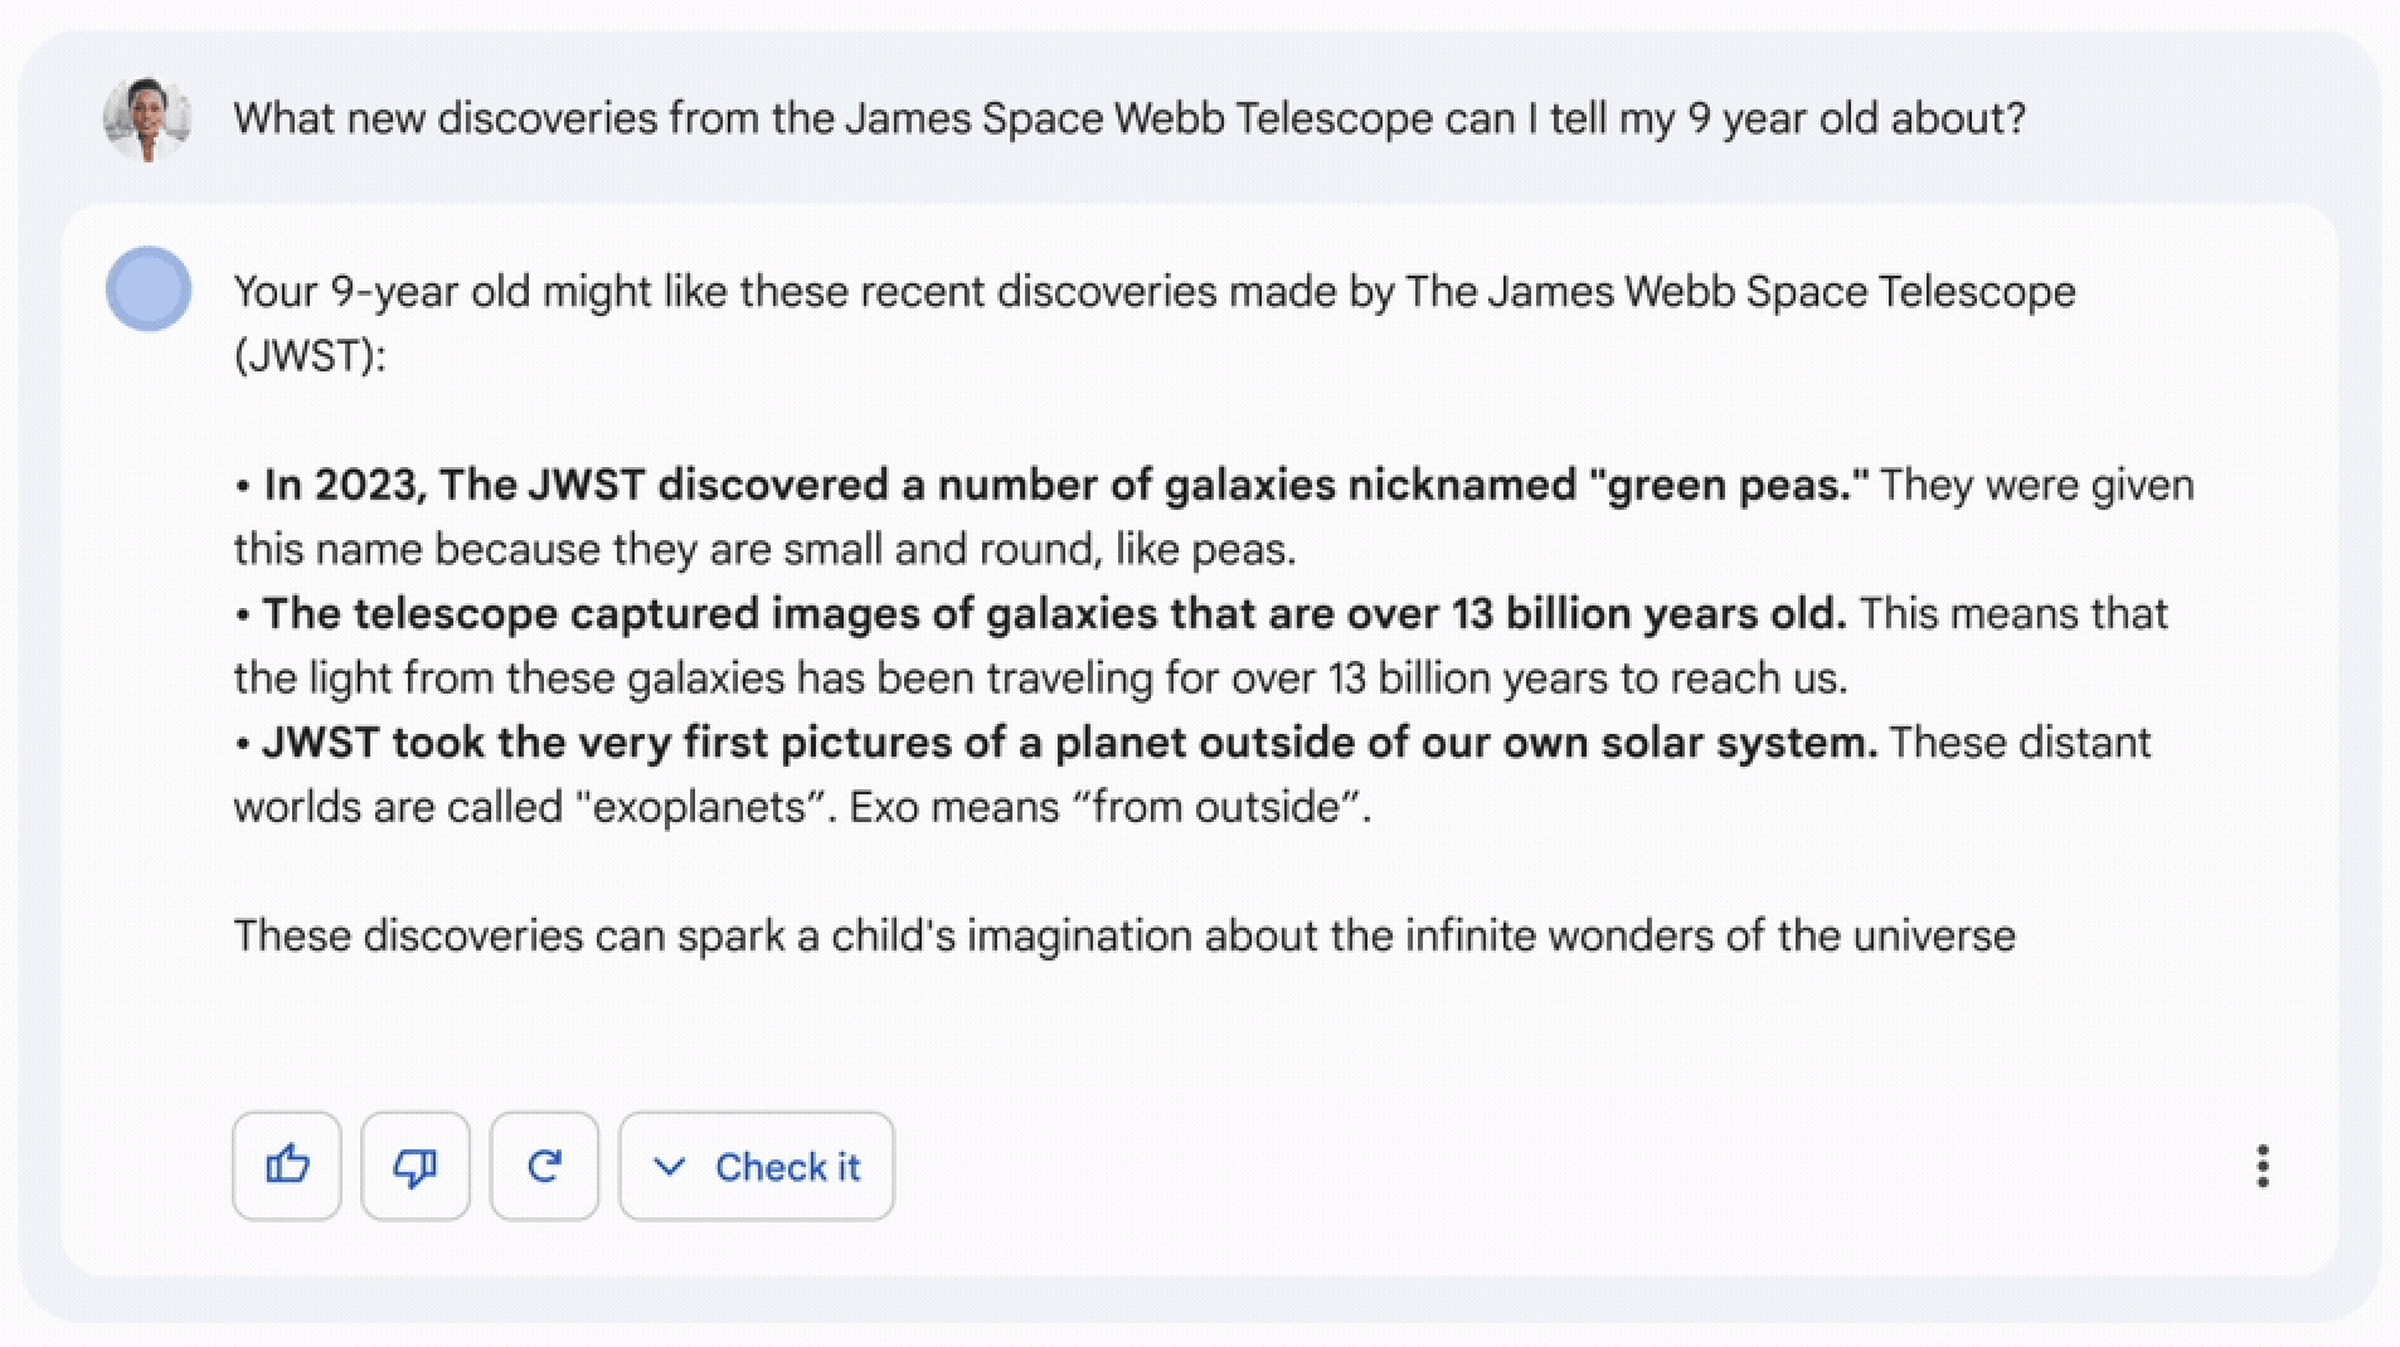 A screenshot of an interaction with Bard. The question says: “What new discoveries from the James Space Webb Telescope can I tell my 9 year old about?” The answers include the bullet point: “JWST took the very first pictures of a planet outside of our own solar system. These distant worlds are called “exoplanets”. Exo means “from outside”.”